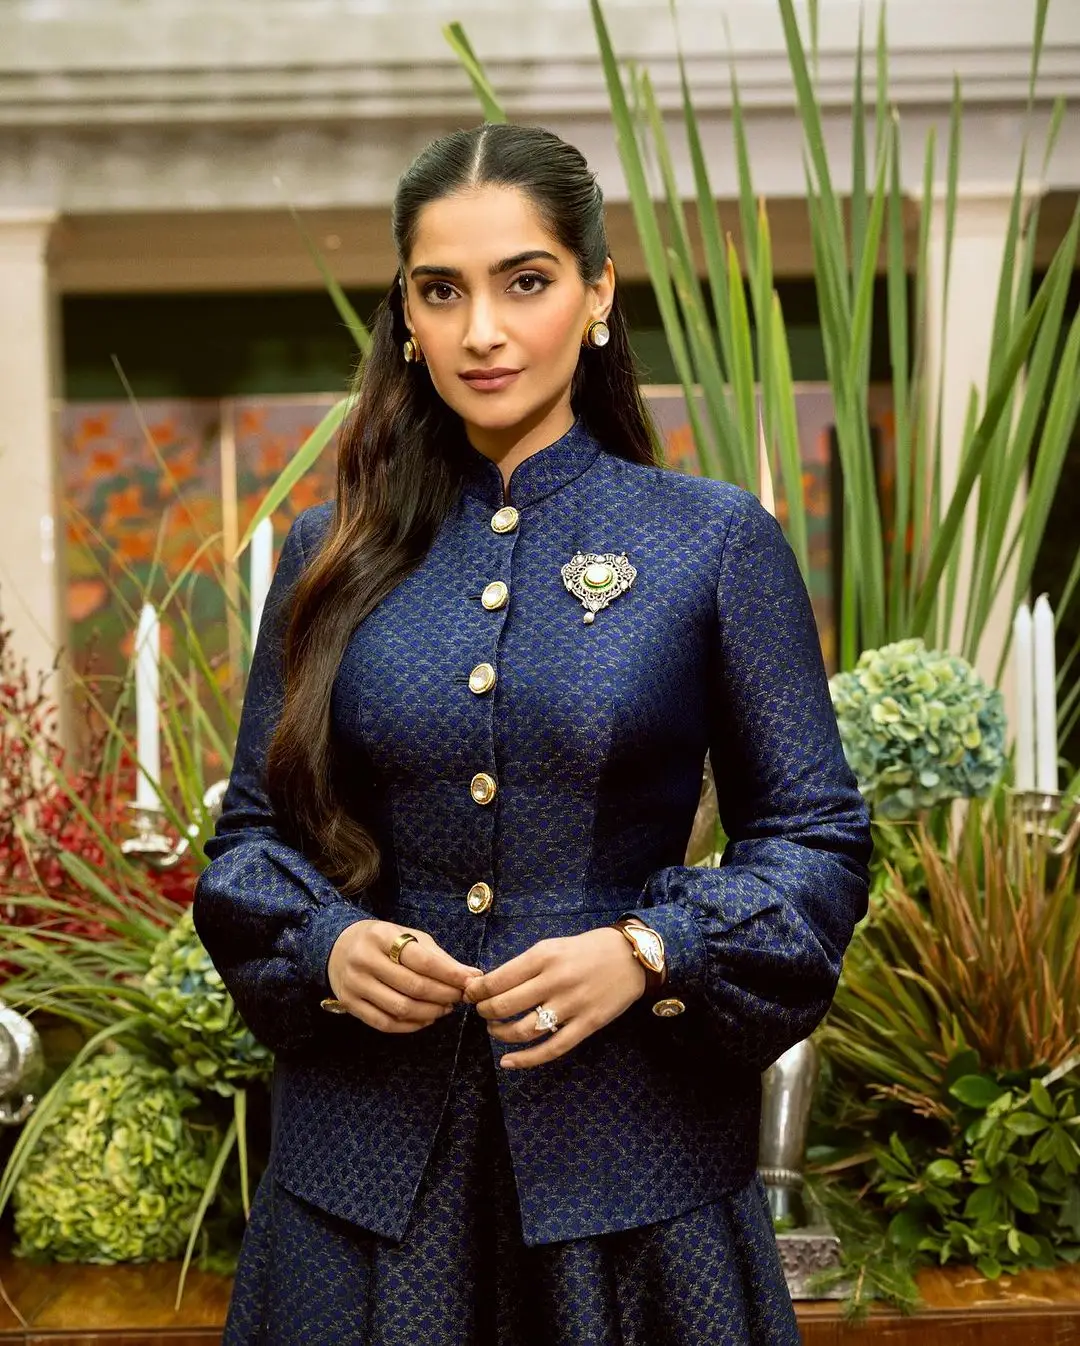 BOLLYWOOD ACTRESS SONAM KAPOOR PHOTOSHOOT IN BLUE COAT AND GOWN